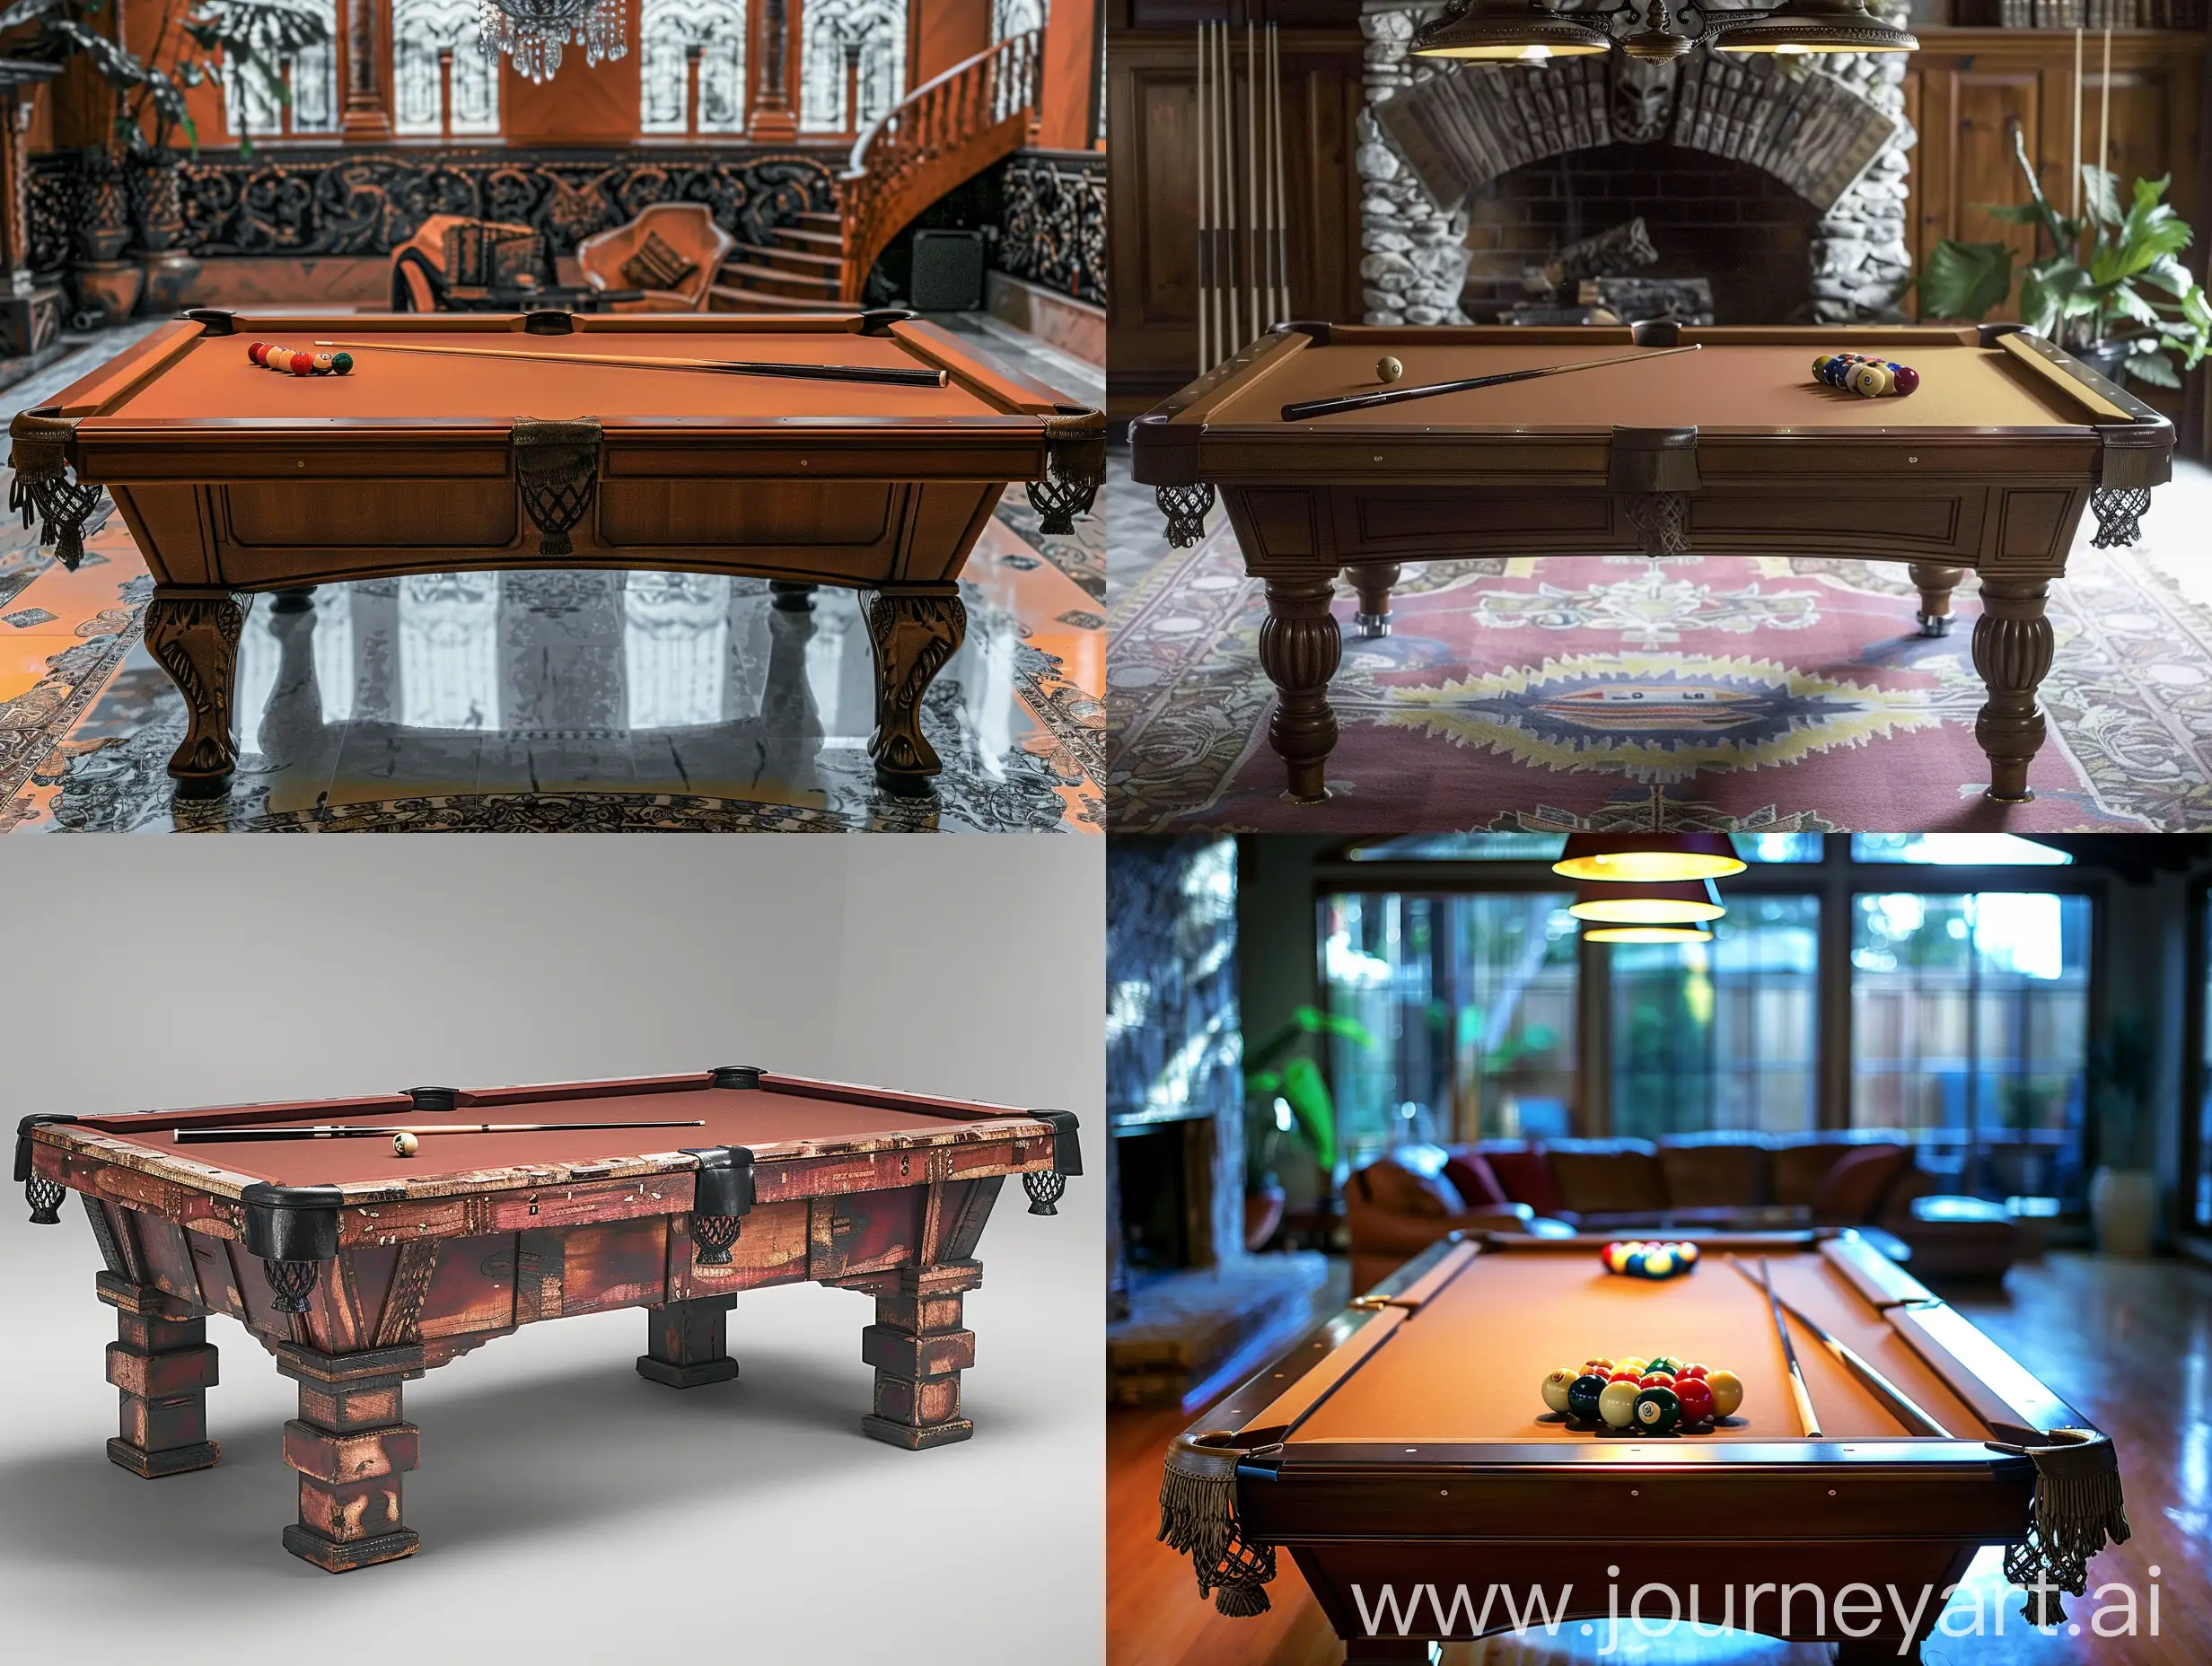 Rustic-Brown-Pool-Table-Majestic-Centerpiece-of-Leisure